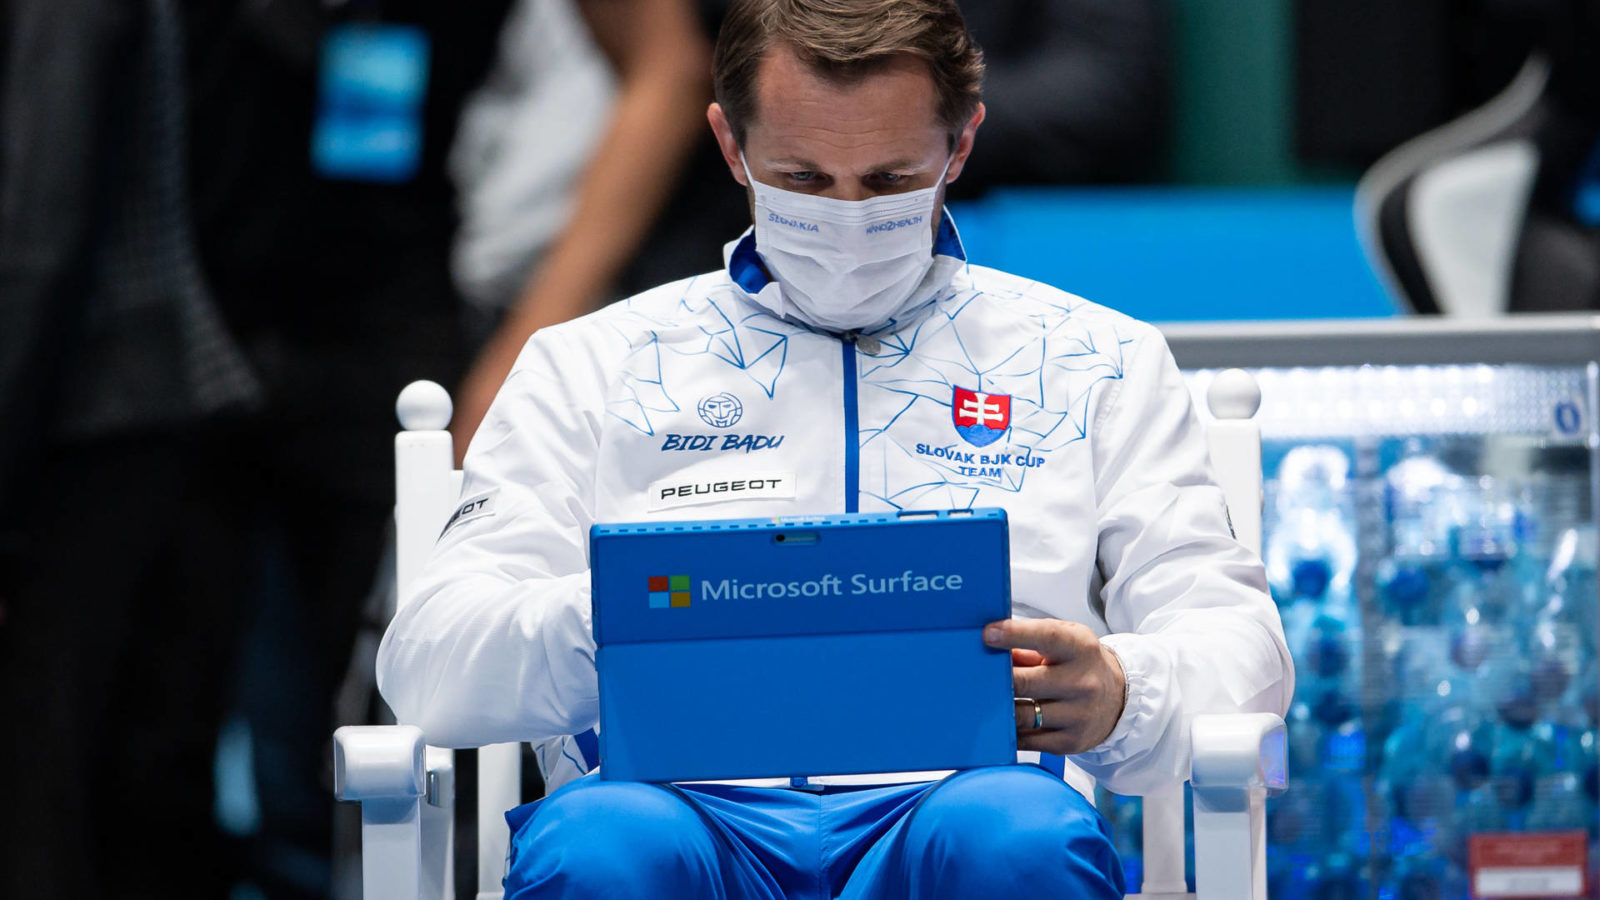 A man sits in a chair with athletic clothes and a mask on. He is holding a Microsoft Surface computer in his lap and looking at it. Various sports logos are visible on his jacket.